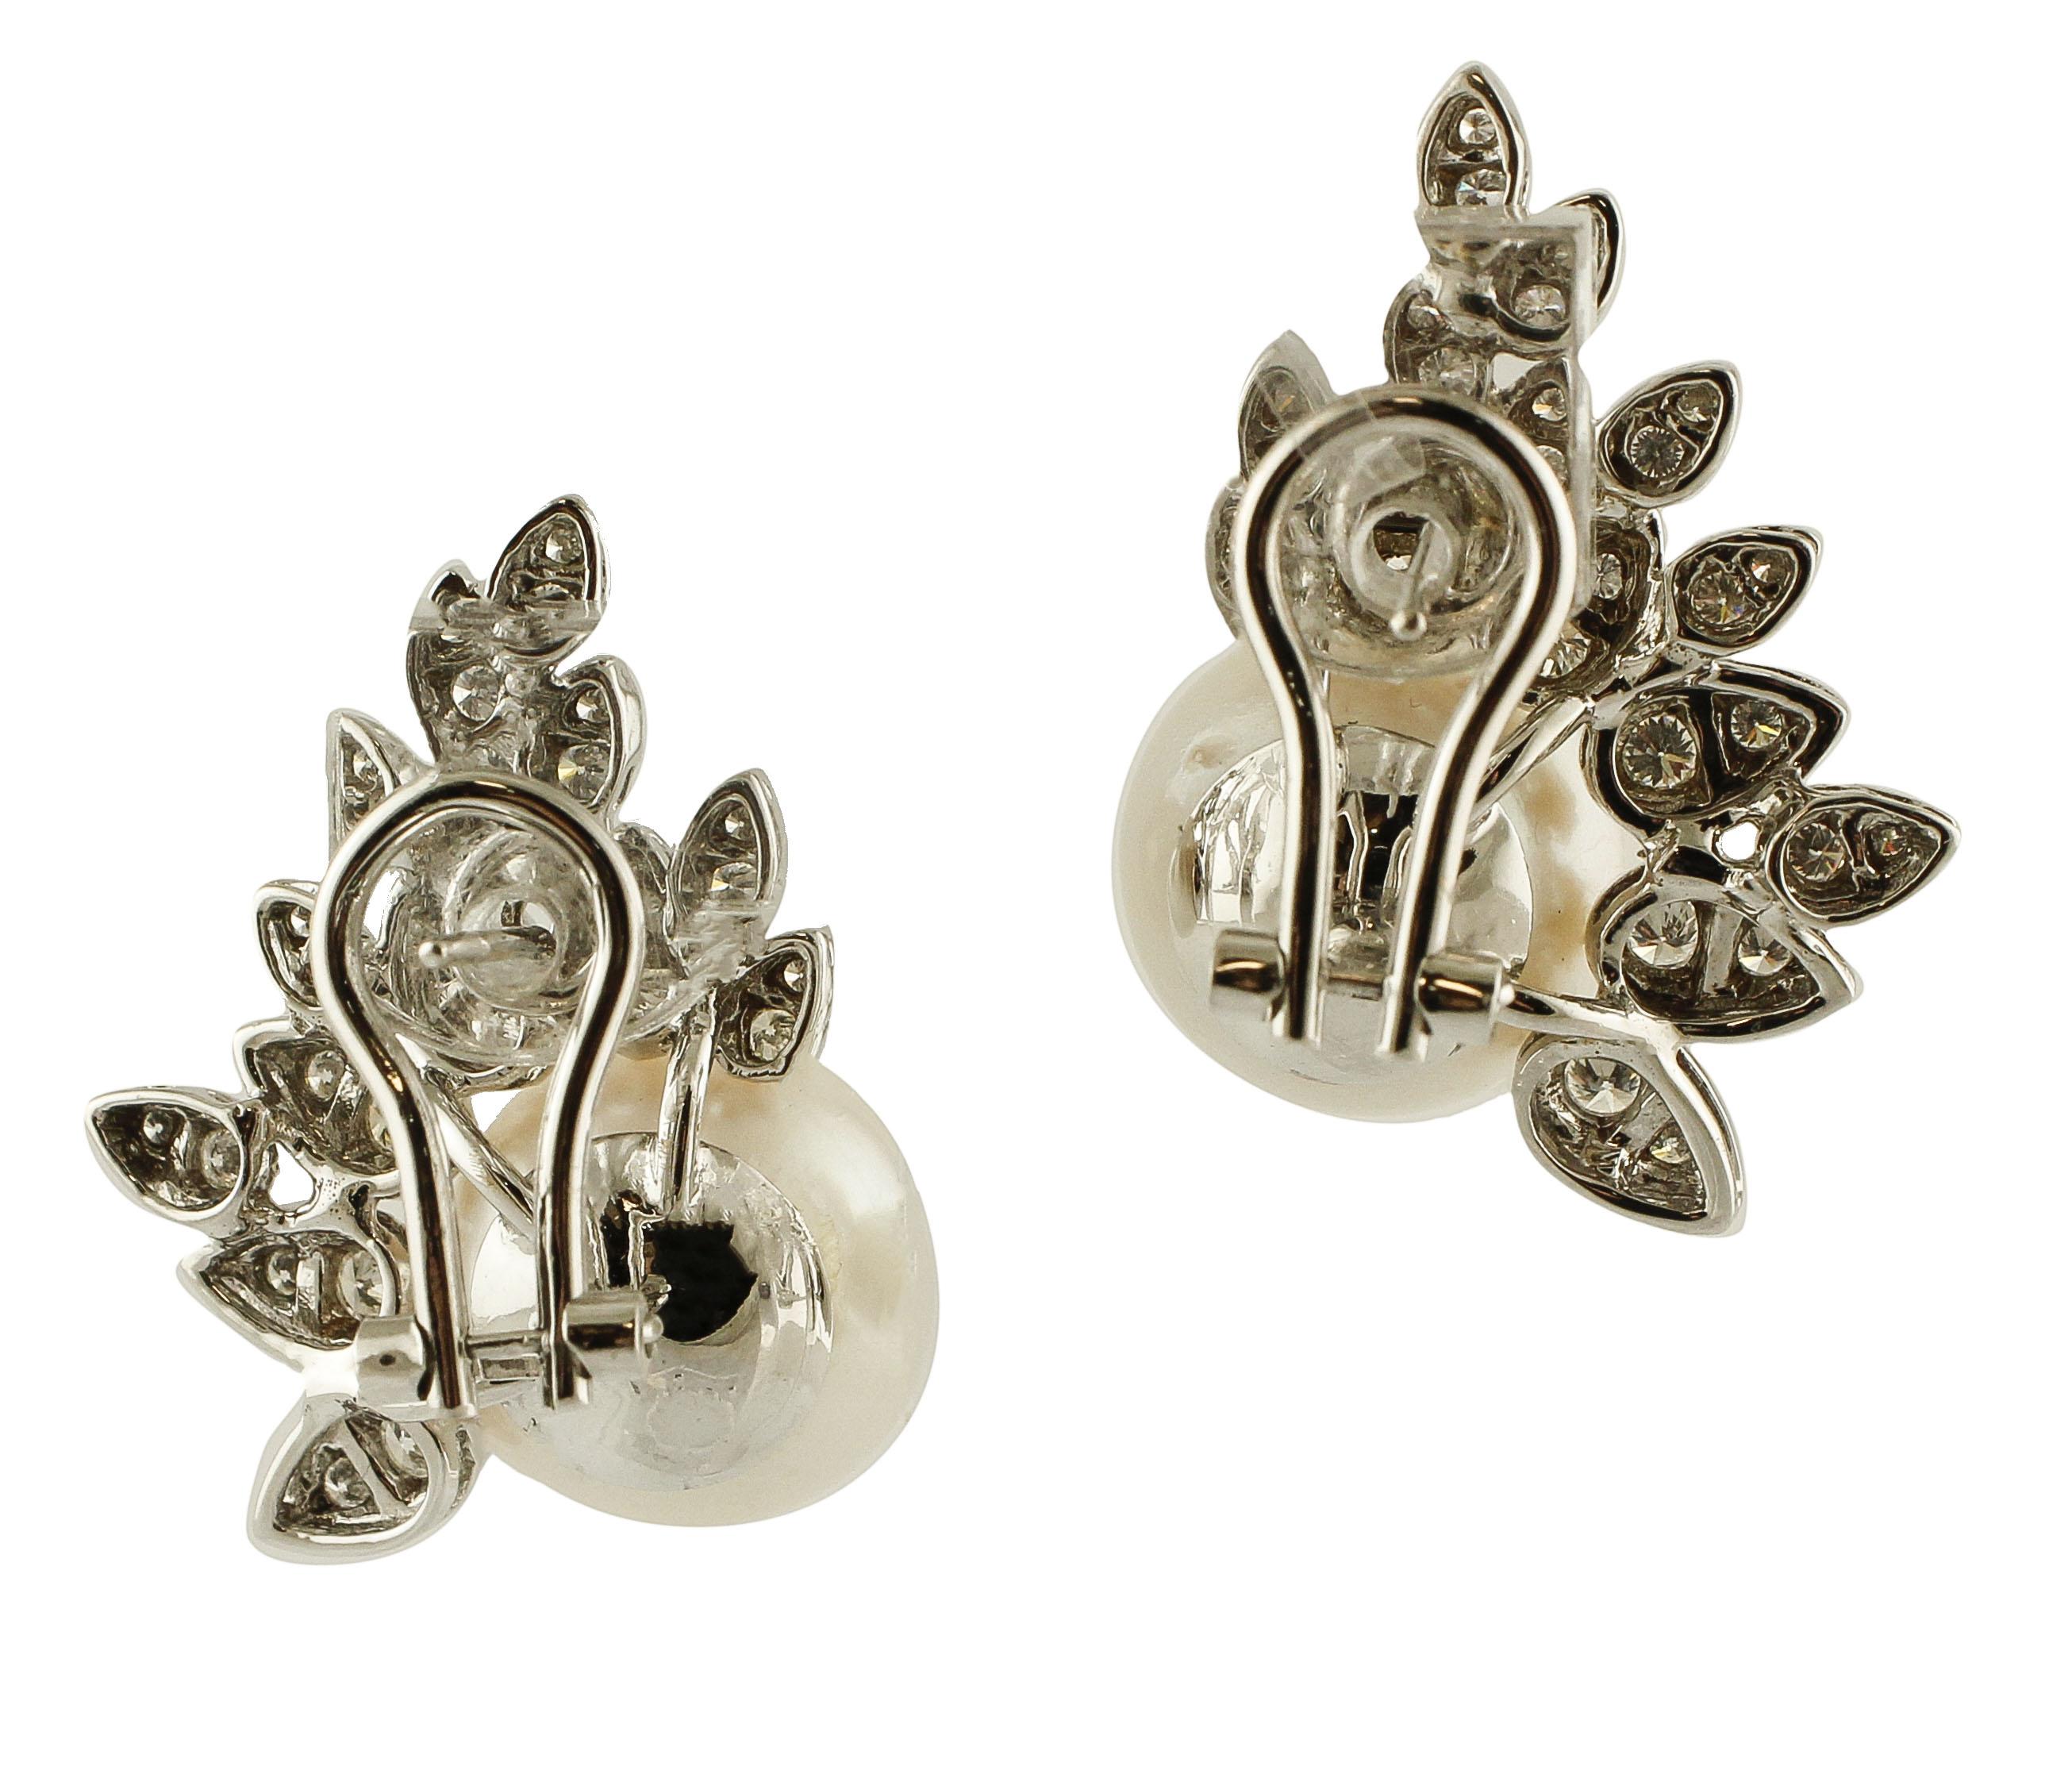 Elegand and refined earrings, realized in 14k white gold and mounted with 5.80 g of 2 Australian white pearls, surrounded by many little white gold leaves studded with diamonds.
These earrings are totally handmade by Italian master